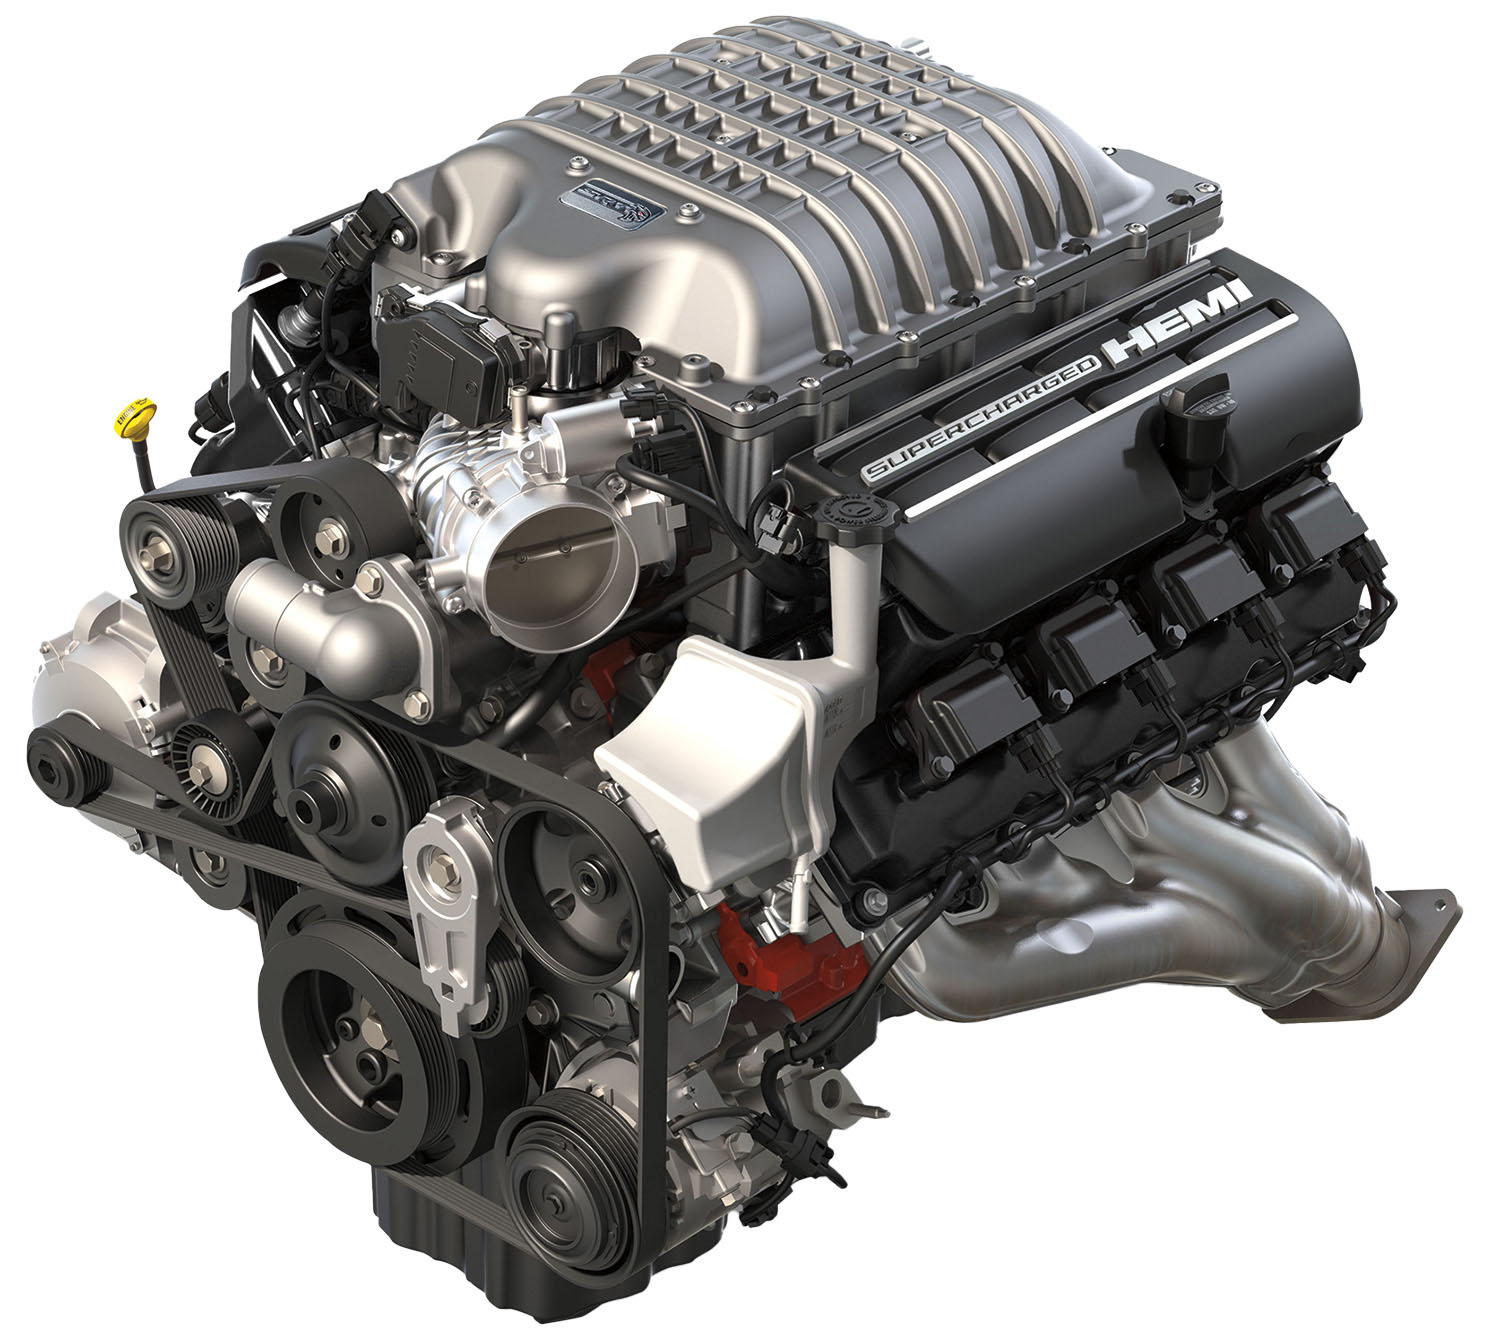 Hellcrate Redeye 6.2-liter supercharged Hemi V8 engine rated for 807 horsepower and 717 lb-ft of torque